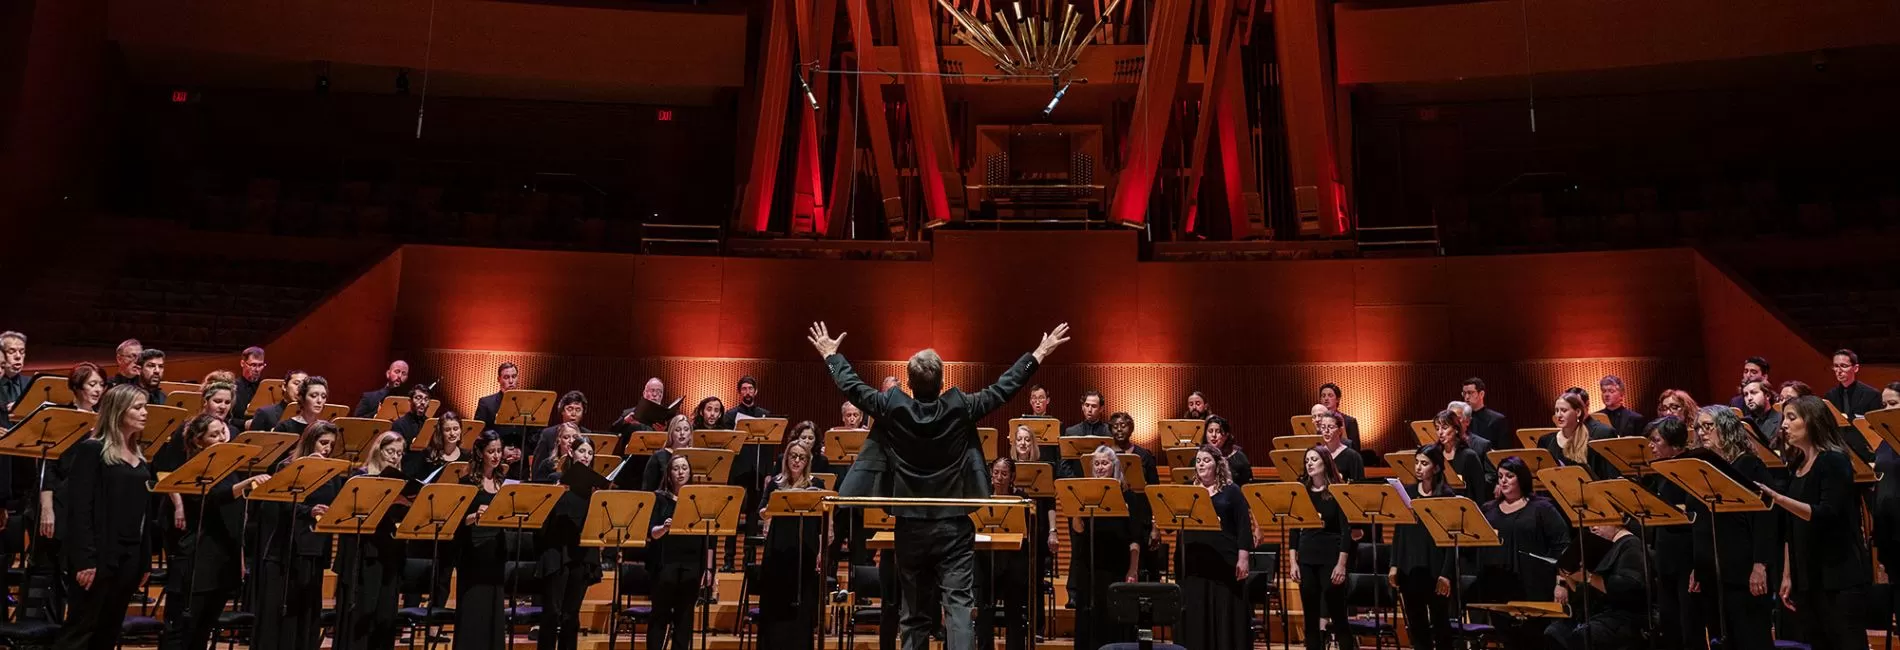 Scott Altman Appointed President and CEO of the Los Angeles Master Chorale